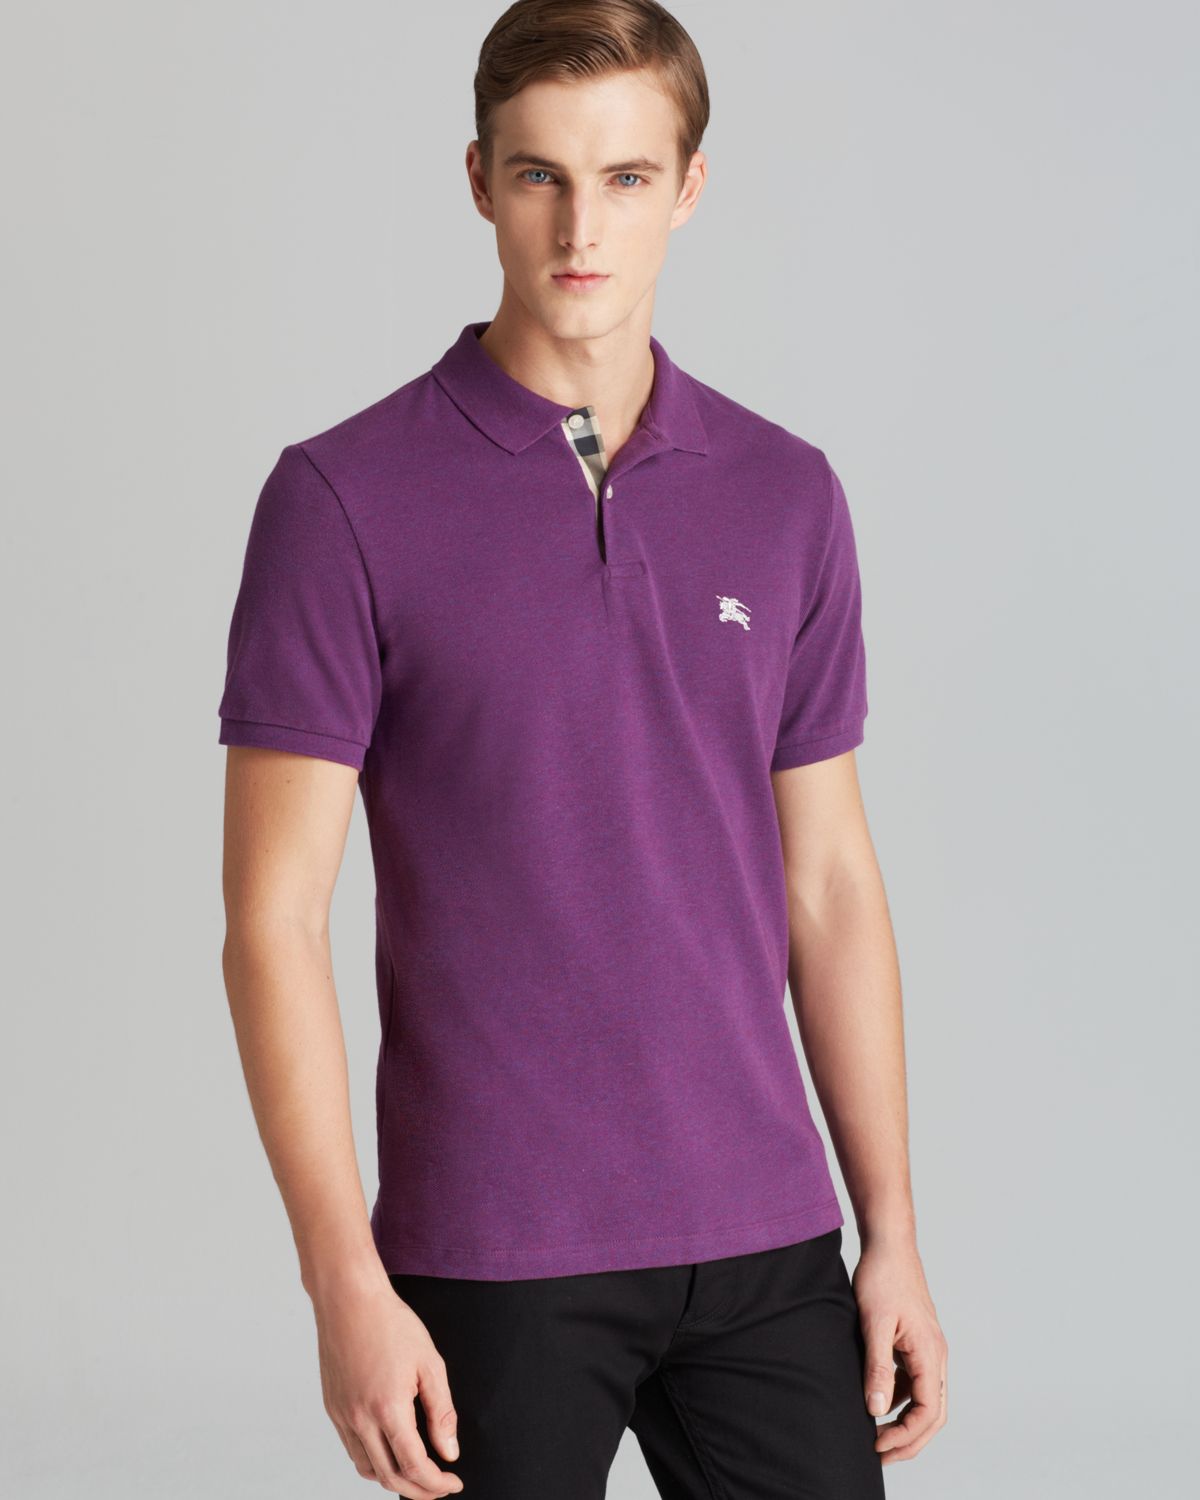 Burberry Brit Modern Fit Polo in Purple for Men - Lyst